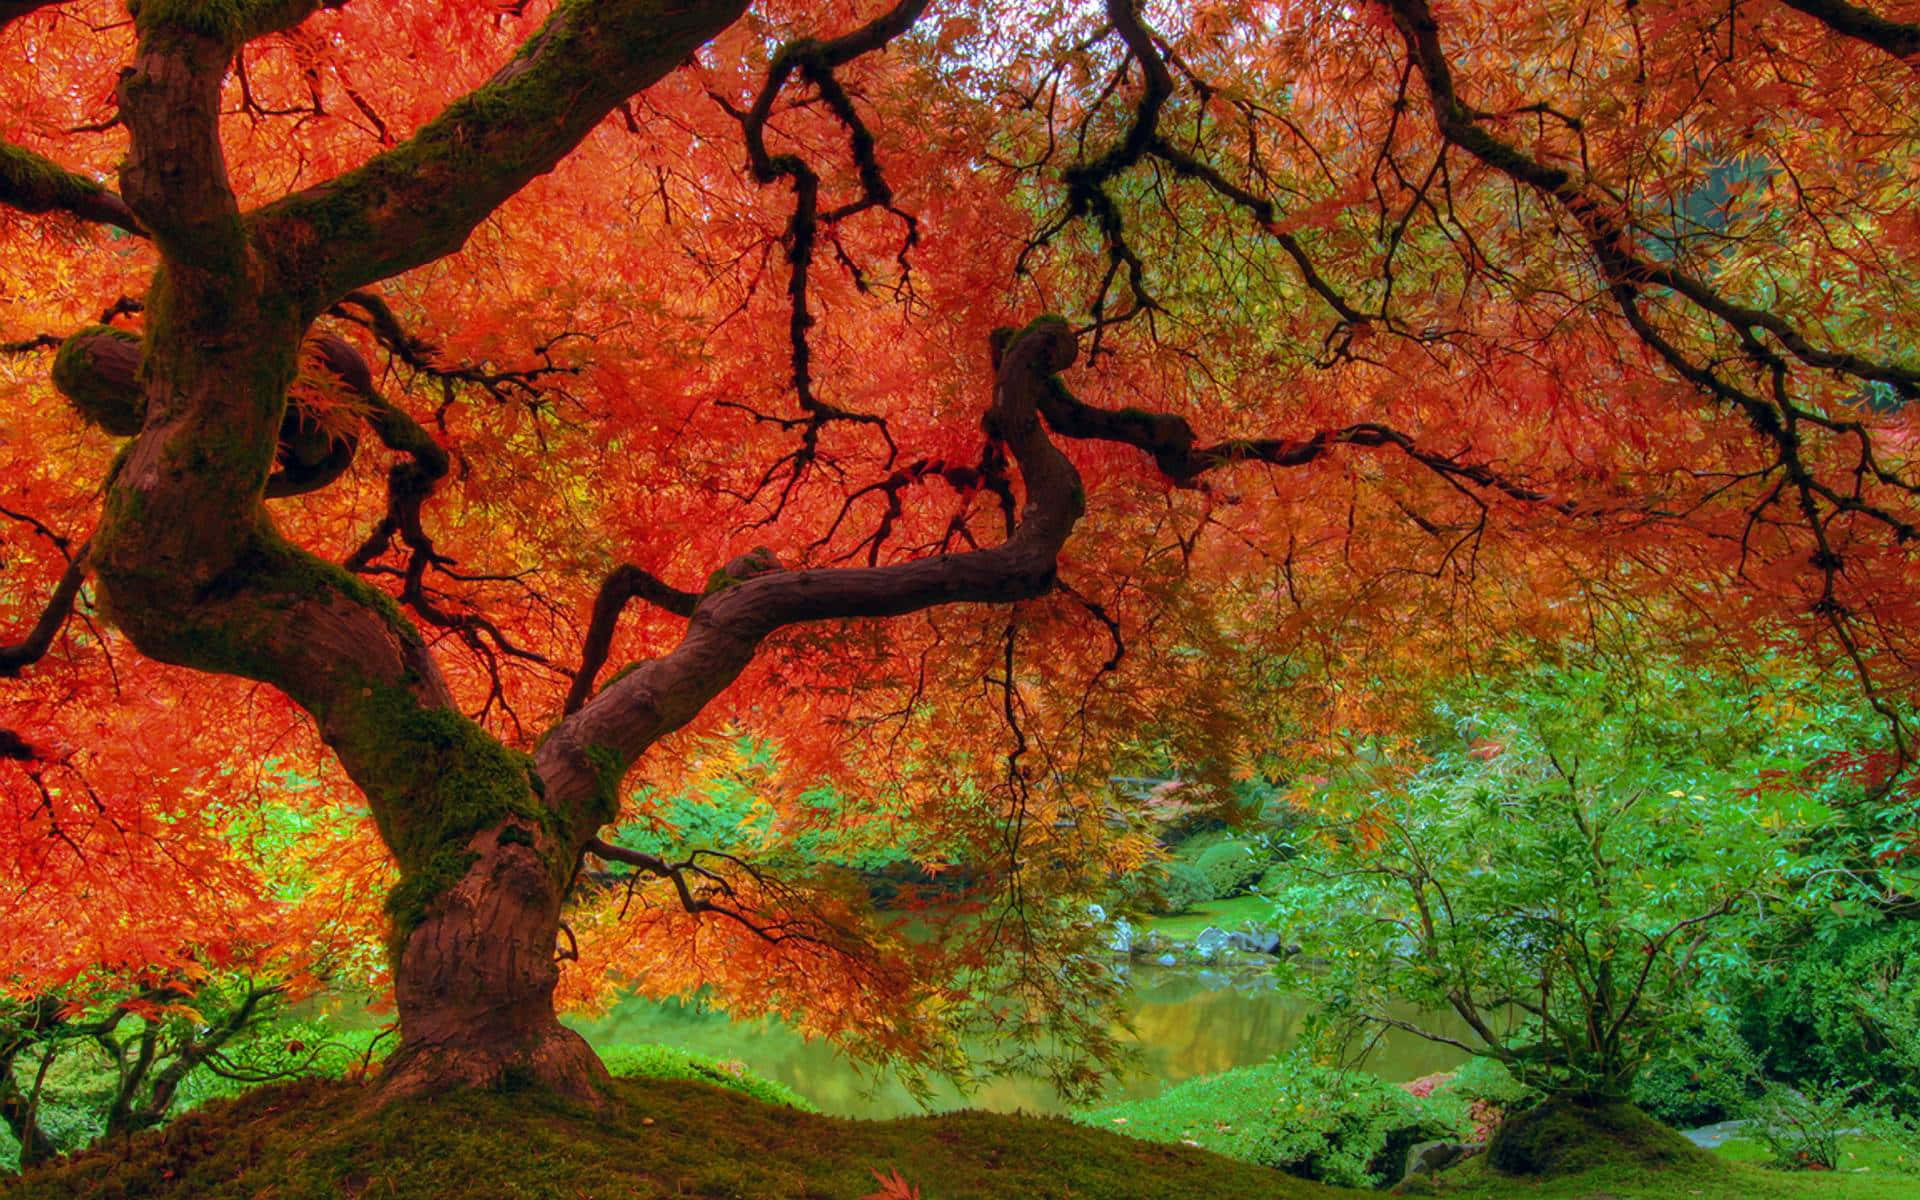 Vibrant Fall Colors in a Serene Forest